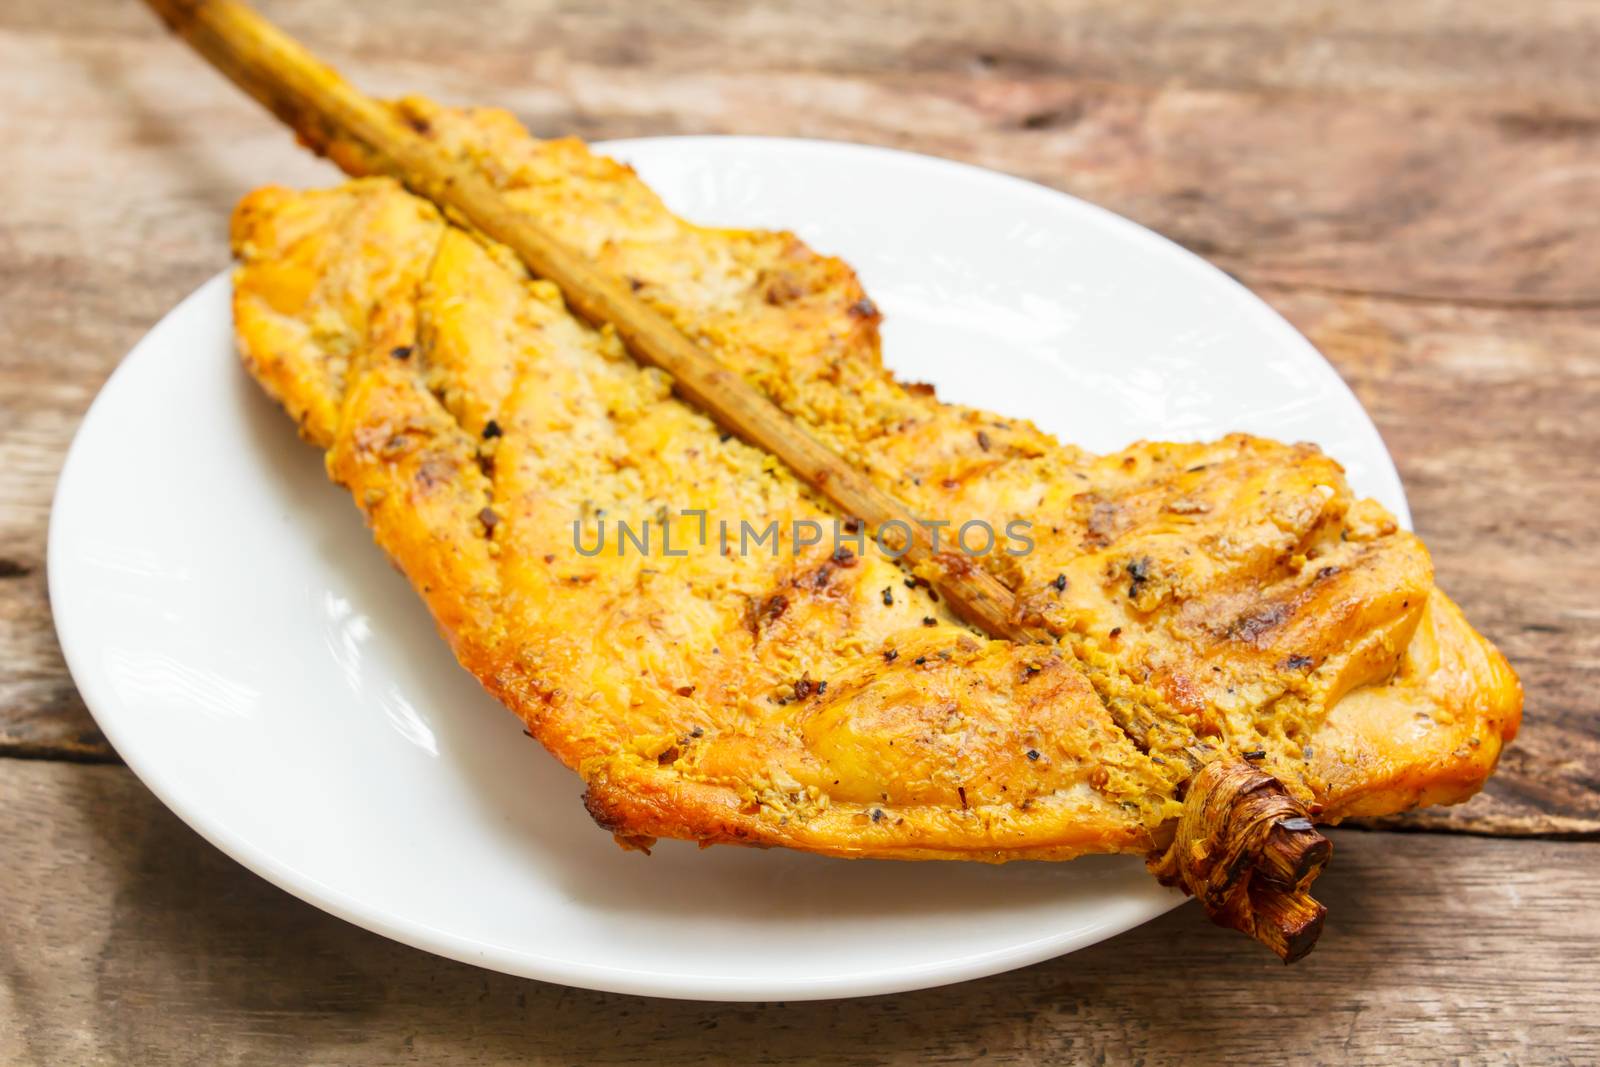 grilled chicken with turmeric, thai's famous cuisine.